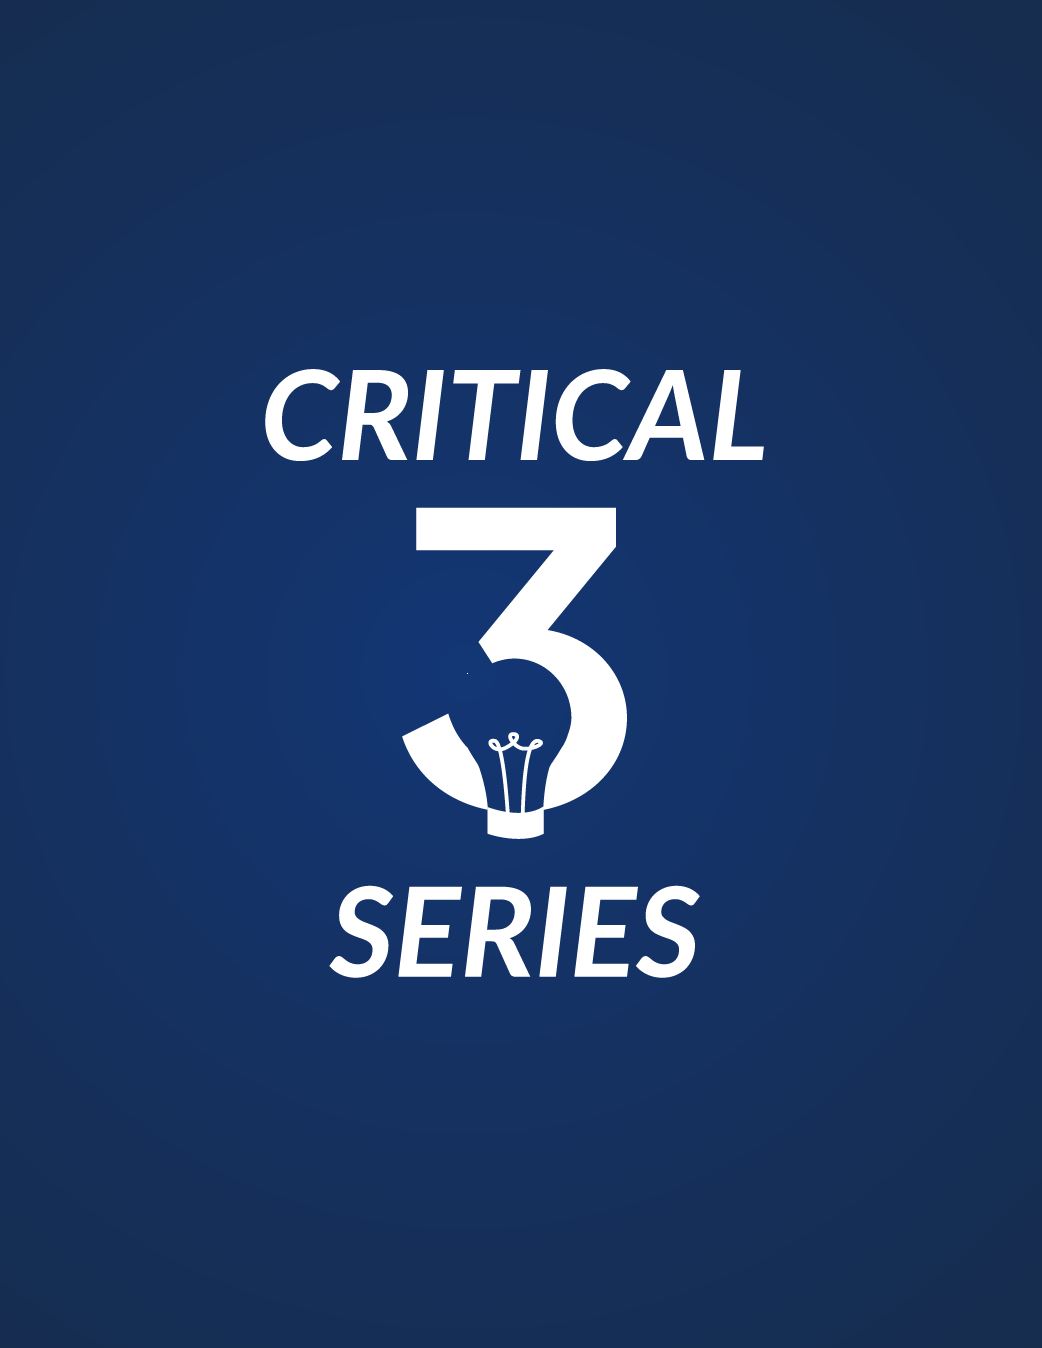 Critical 3 - Crisis Management: What the Media Want to Hear From You